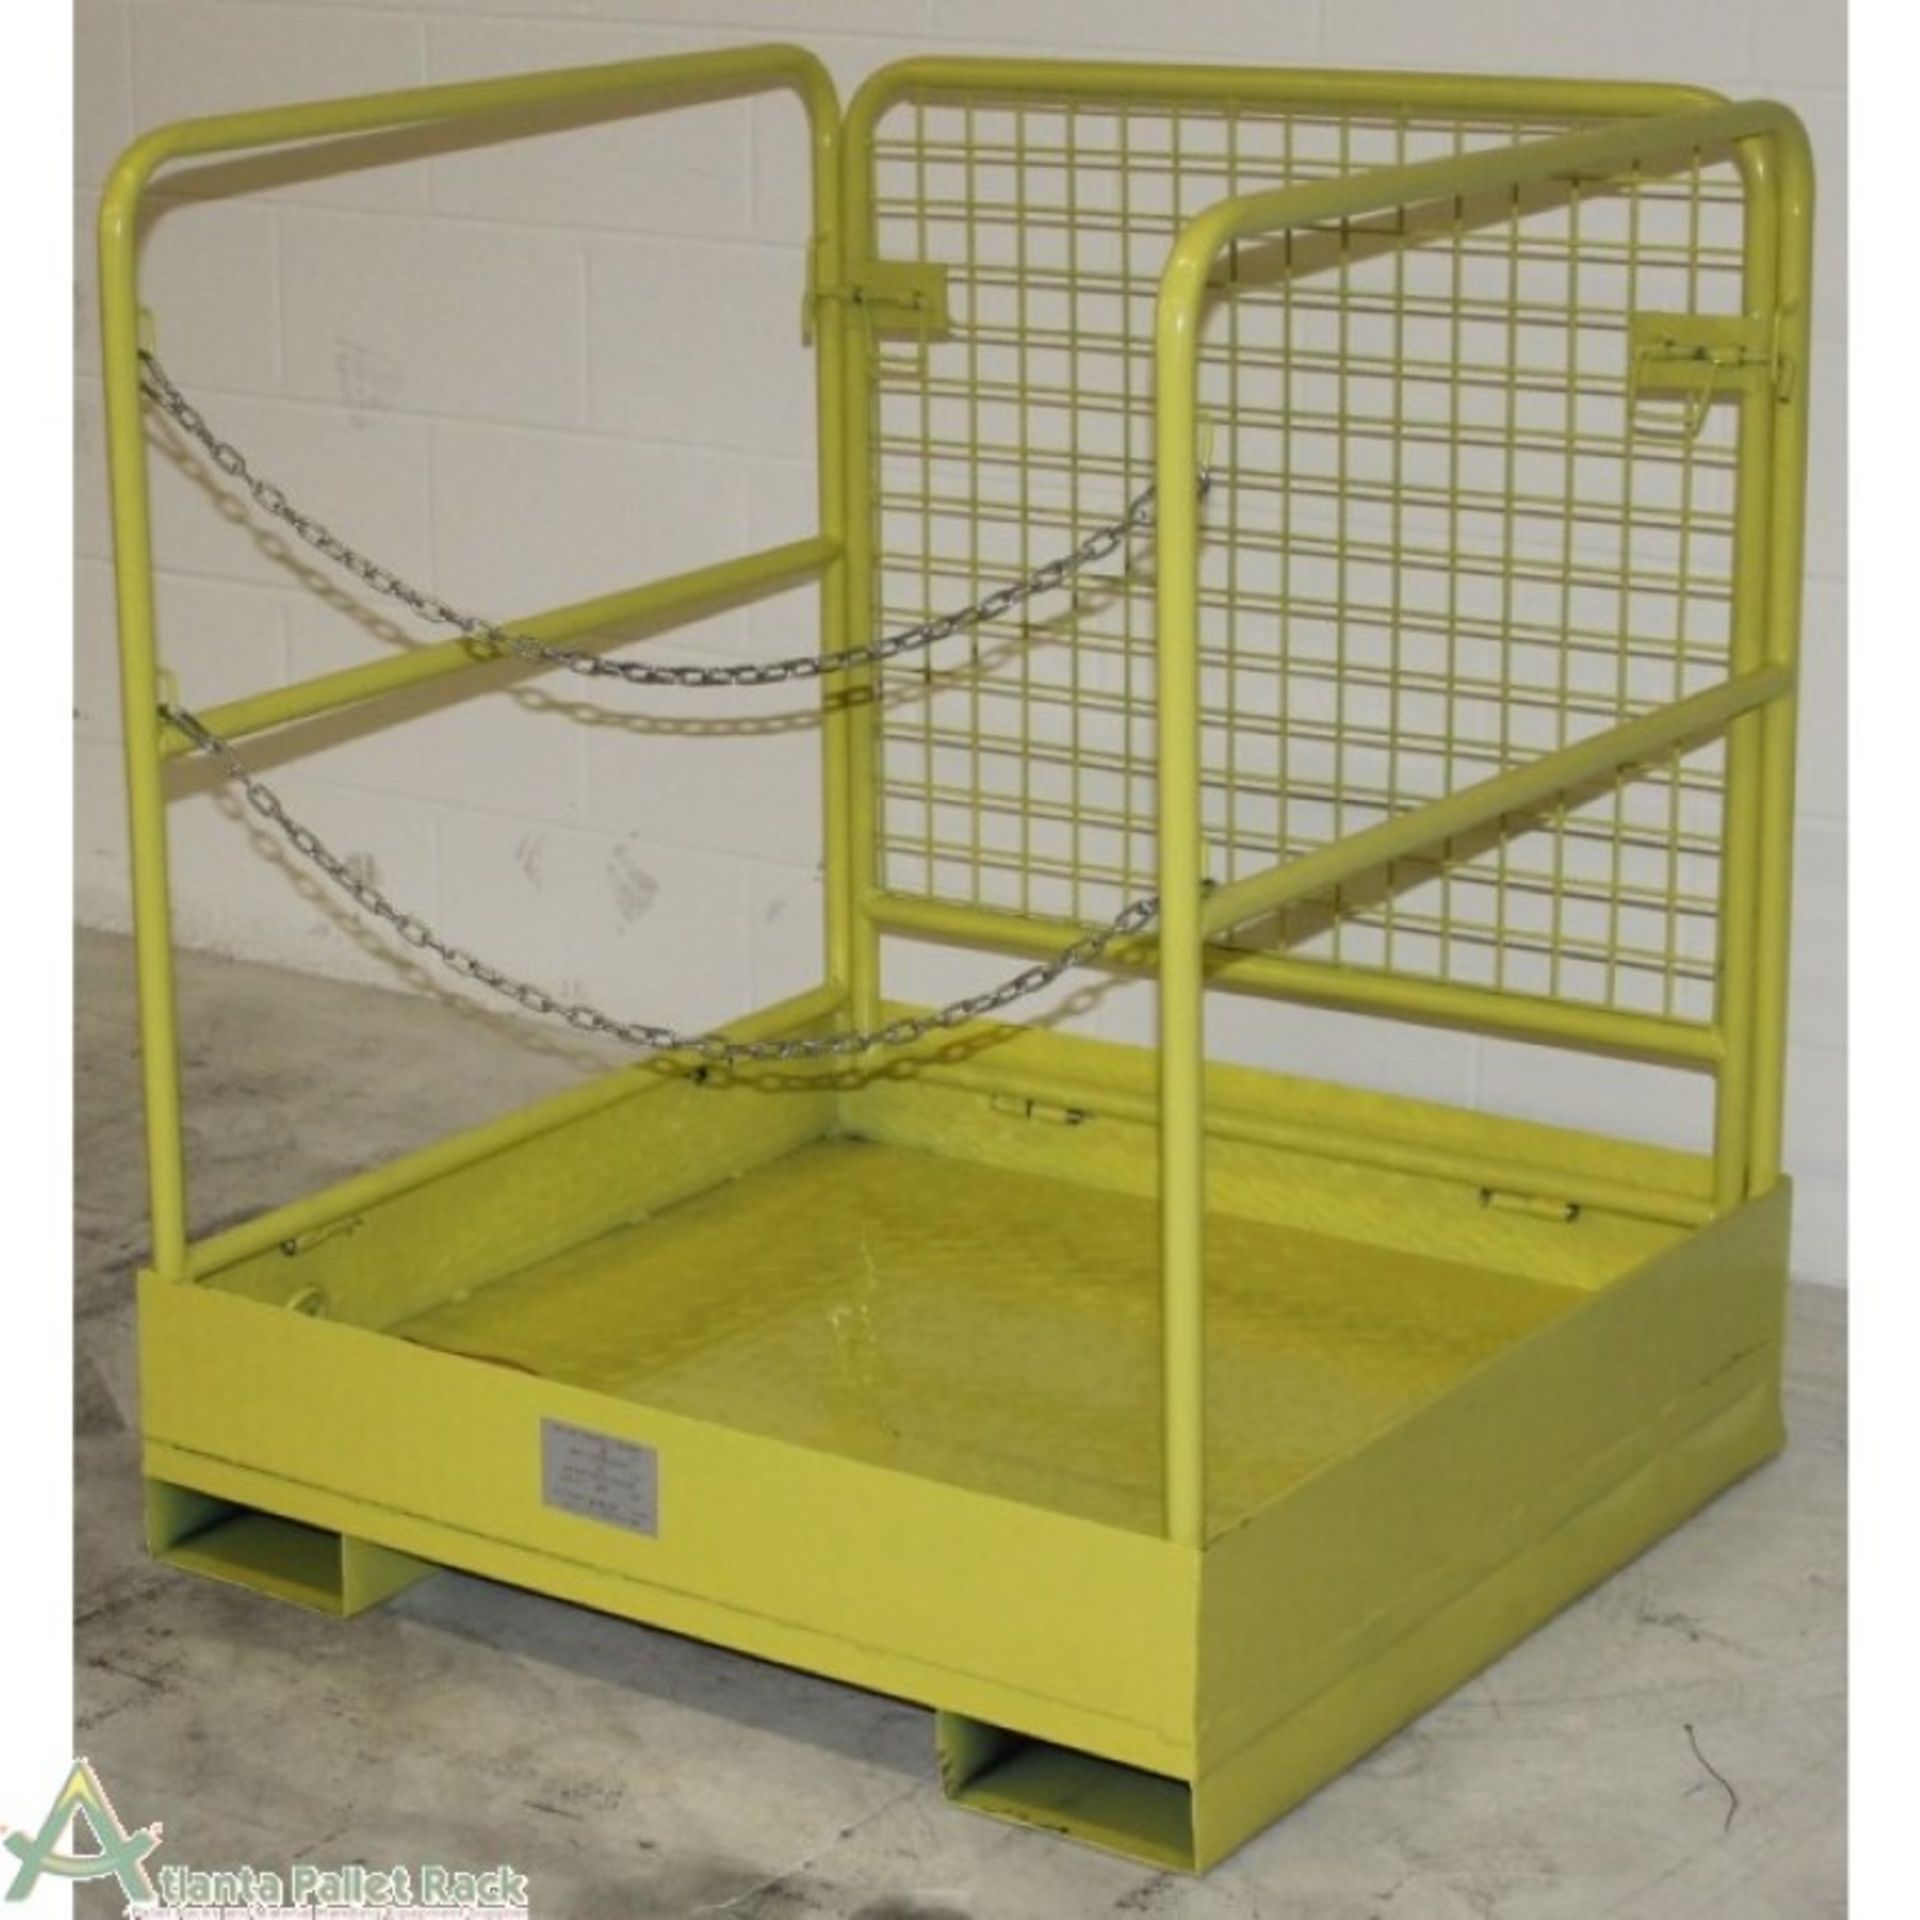 BRAND NEW ECONOMY FORKLIFT MANBASKET,  SIZE: 36"W X 36"D X 42"H, 38" TALL RAILS, CAPACITY: 750 - Image 2 of 2